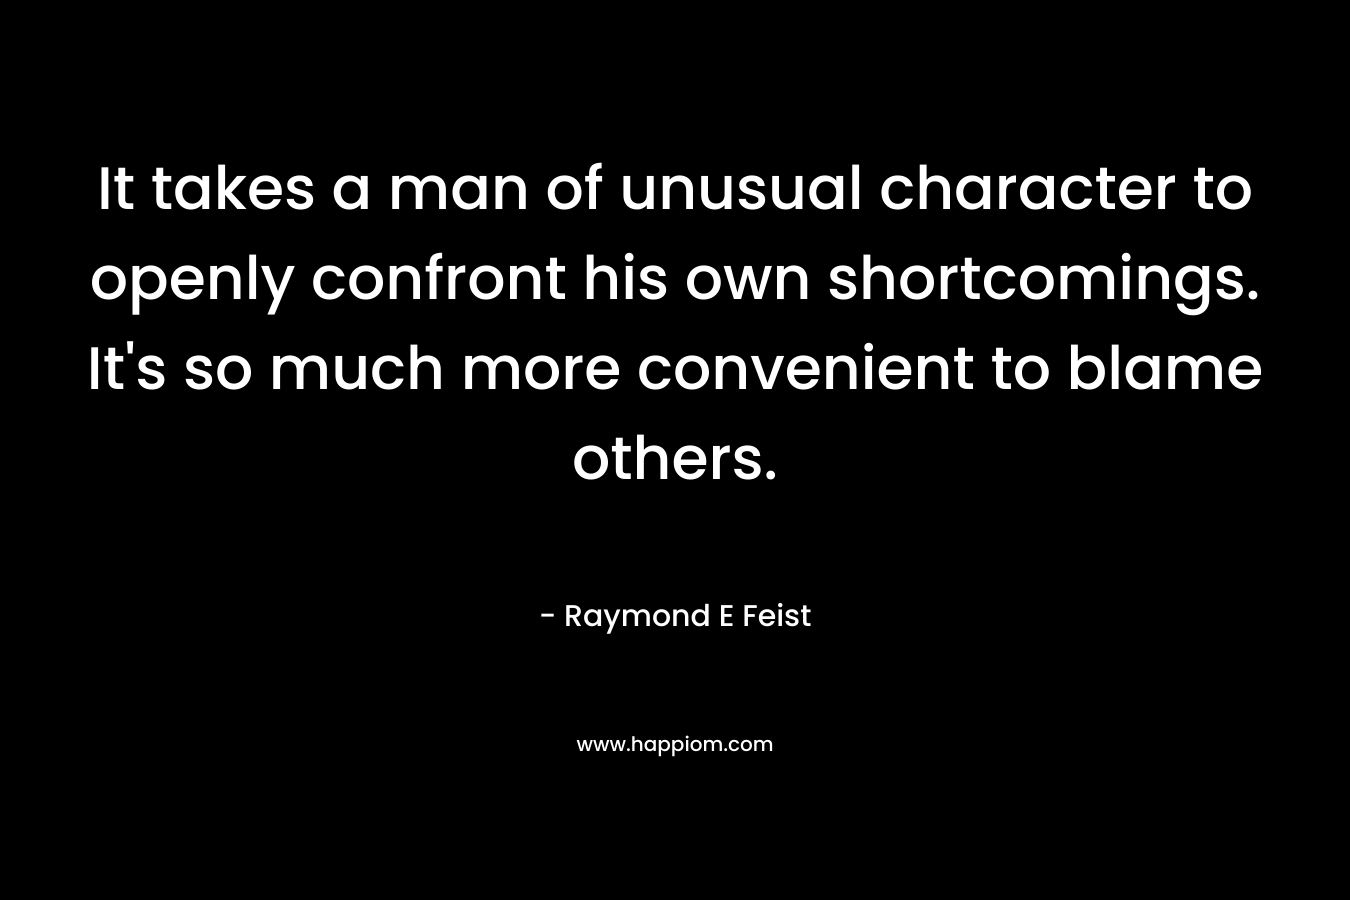 It takes a man of unusual character to openly confront his own shortcomings. It’s so much more convenient to blame others. – Raymond E Feist